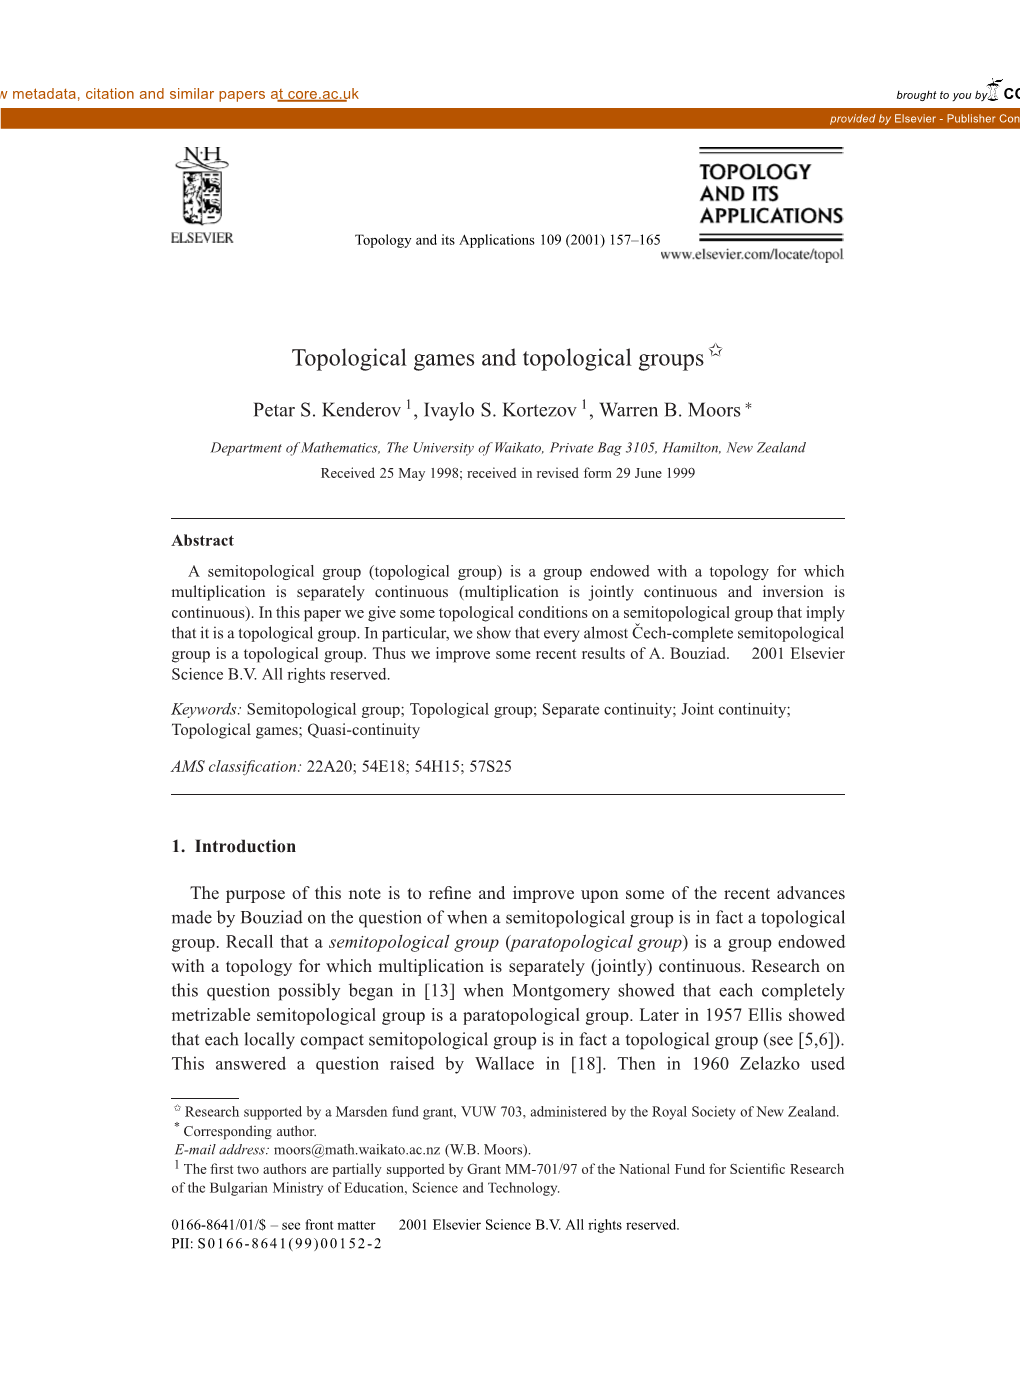 Topological Games and Topological Groups ✩